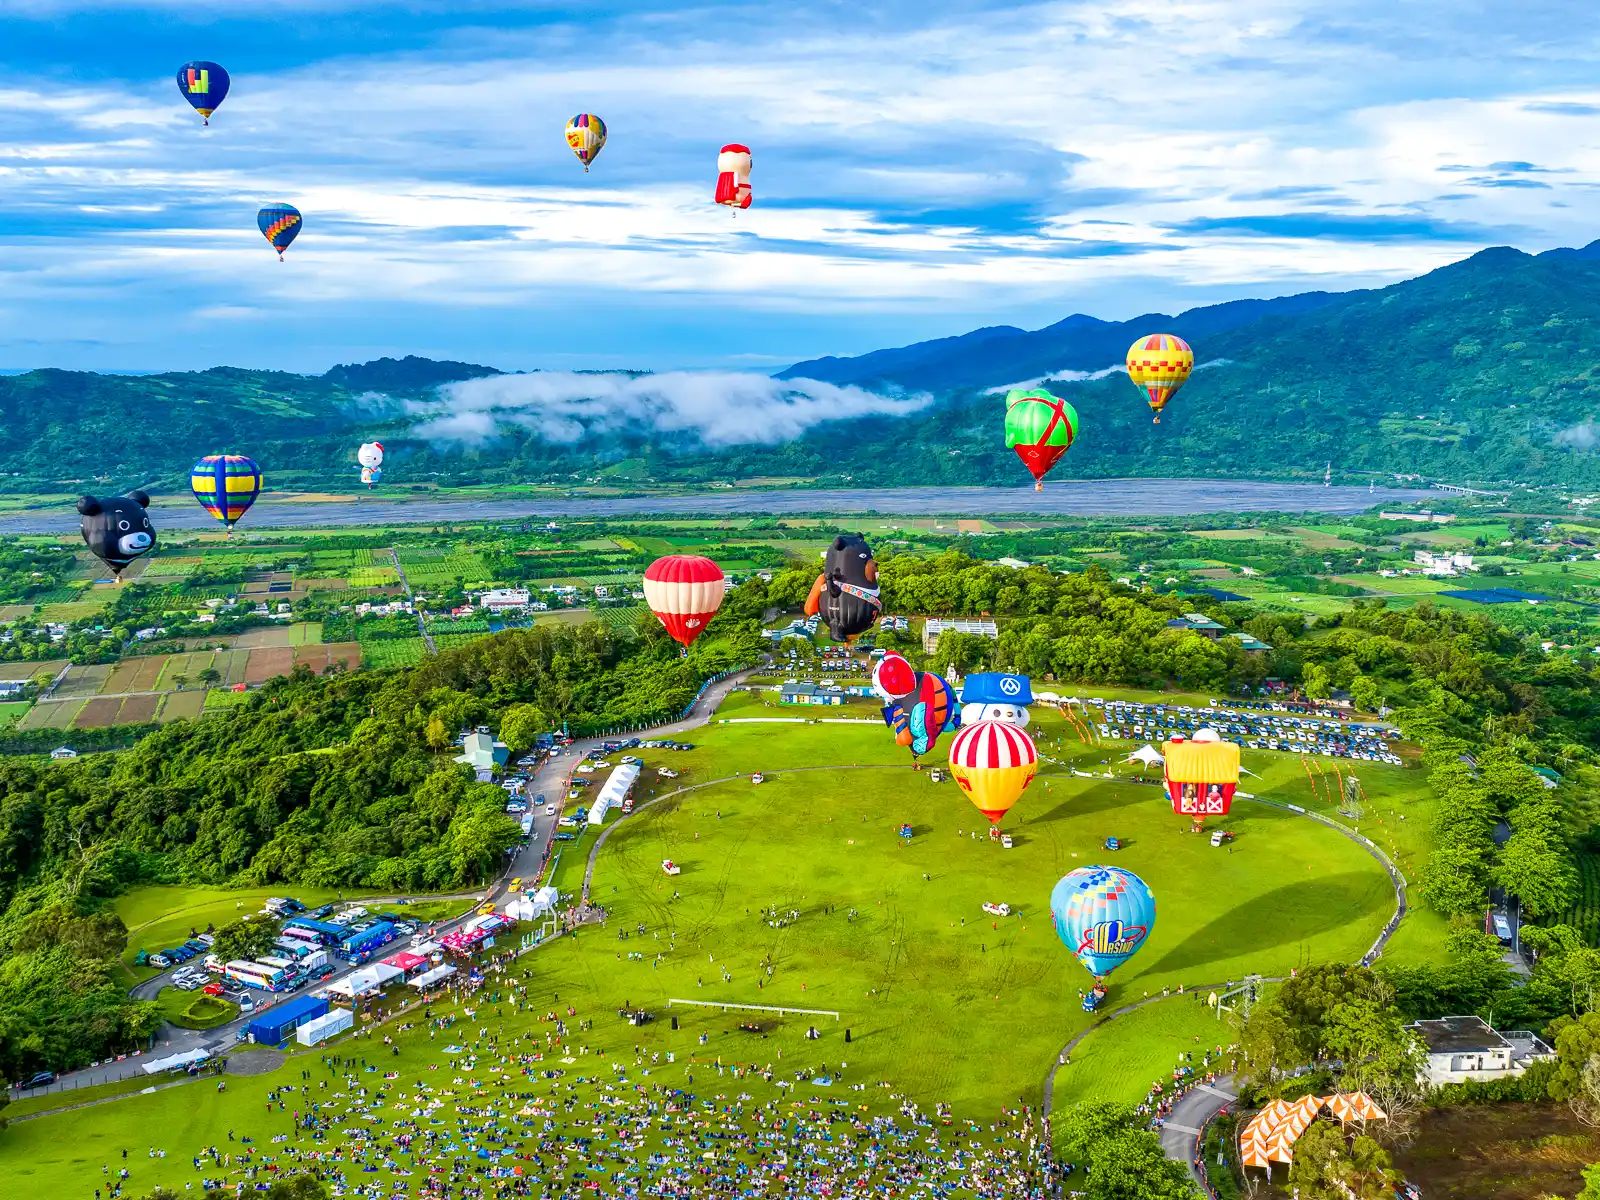 Over a dozen balloons take off from the Luye Highlands and soar over the East Longitudinal Valley.